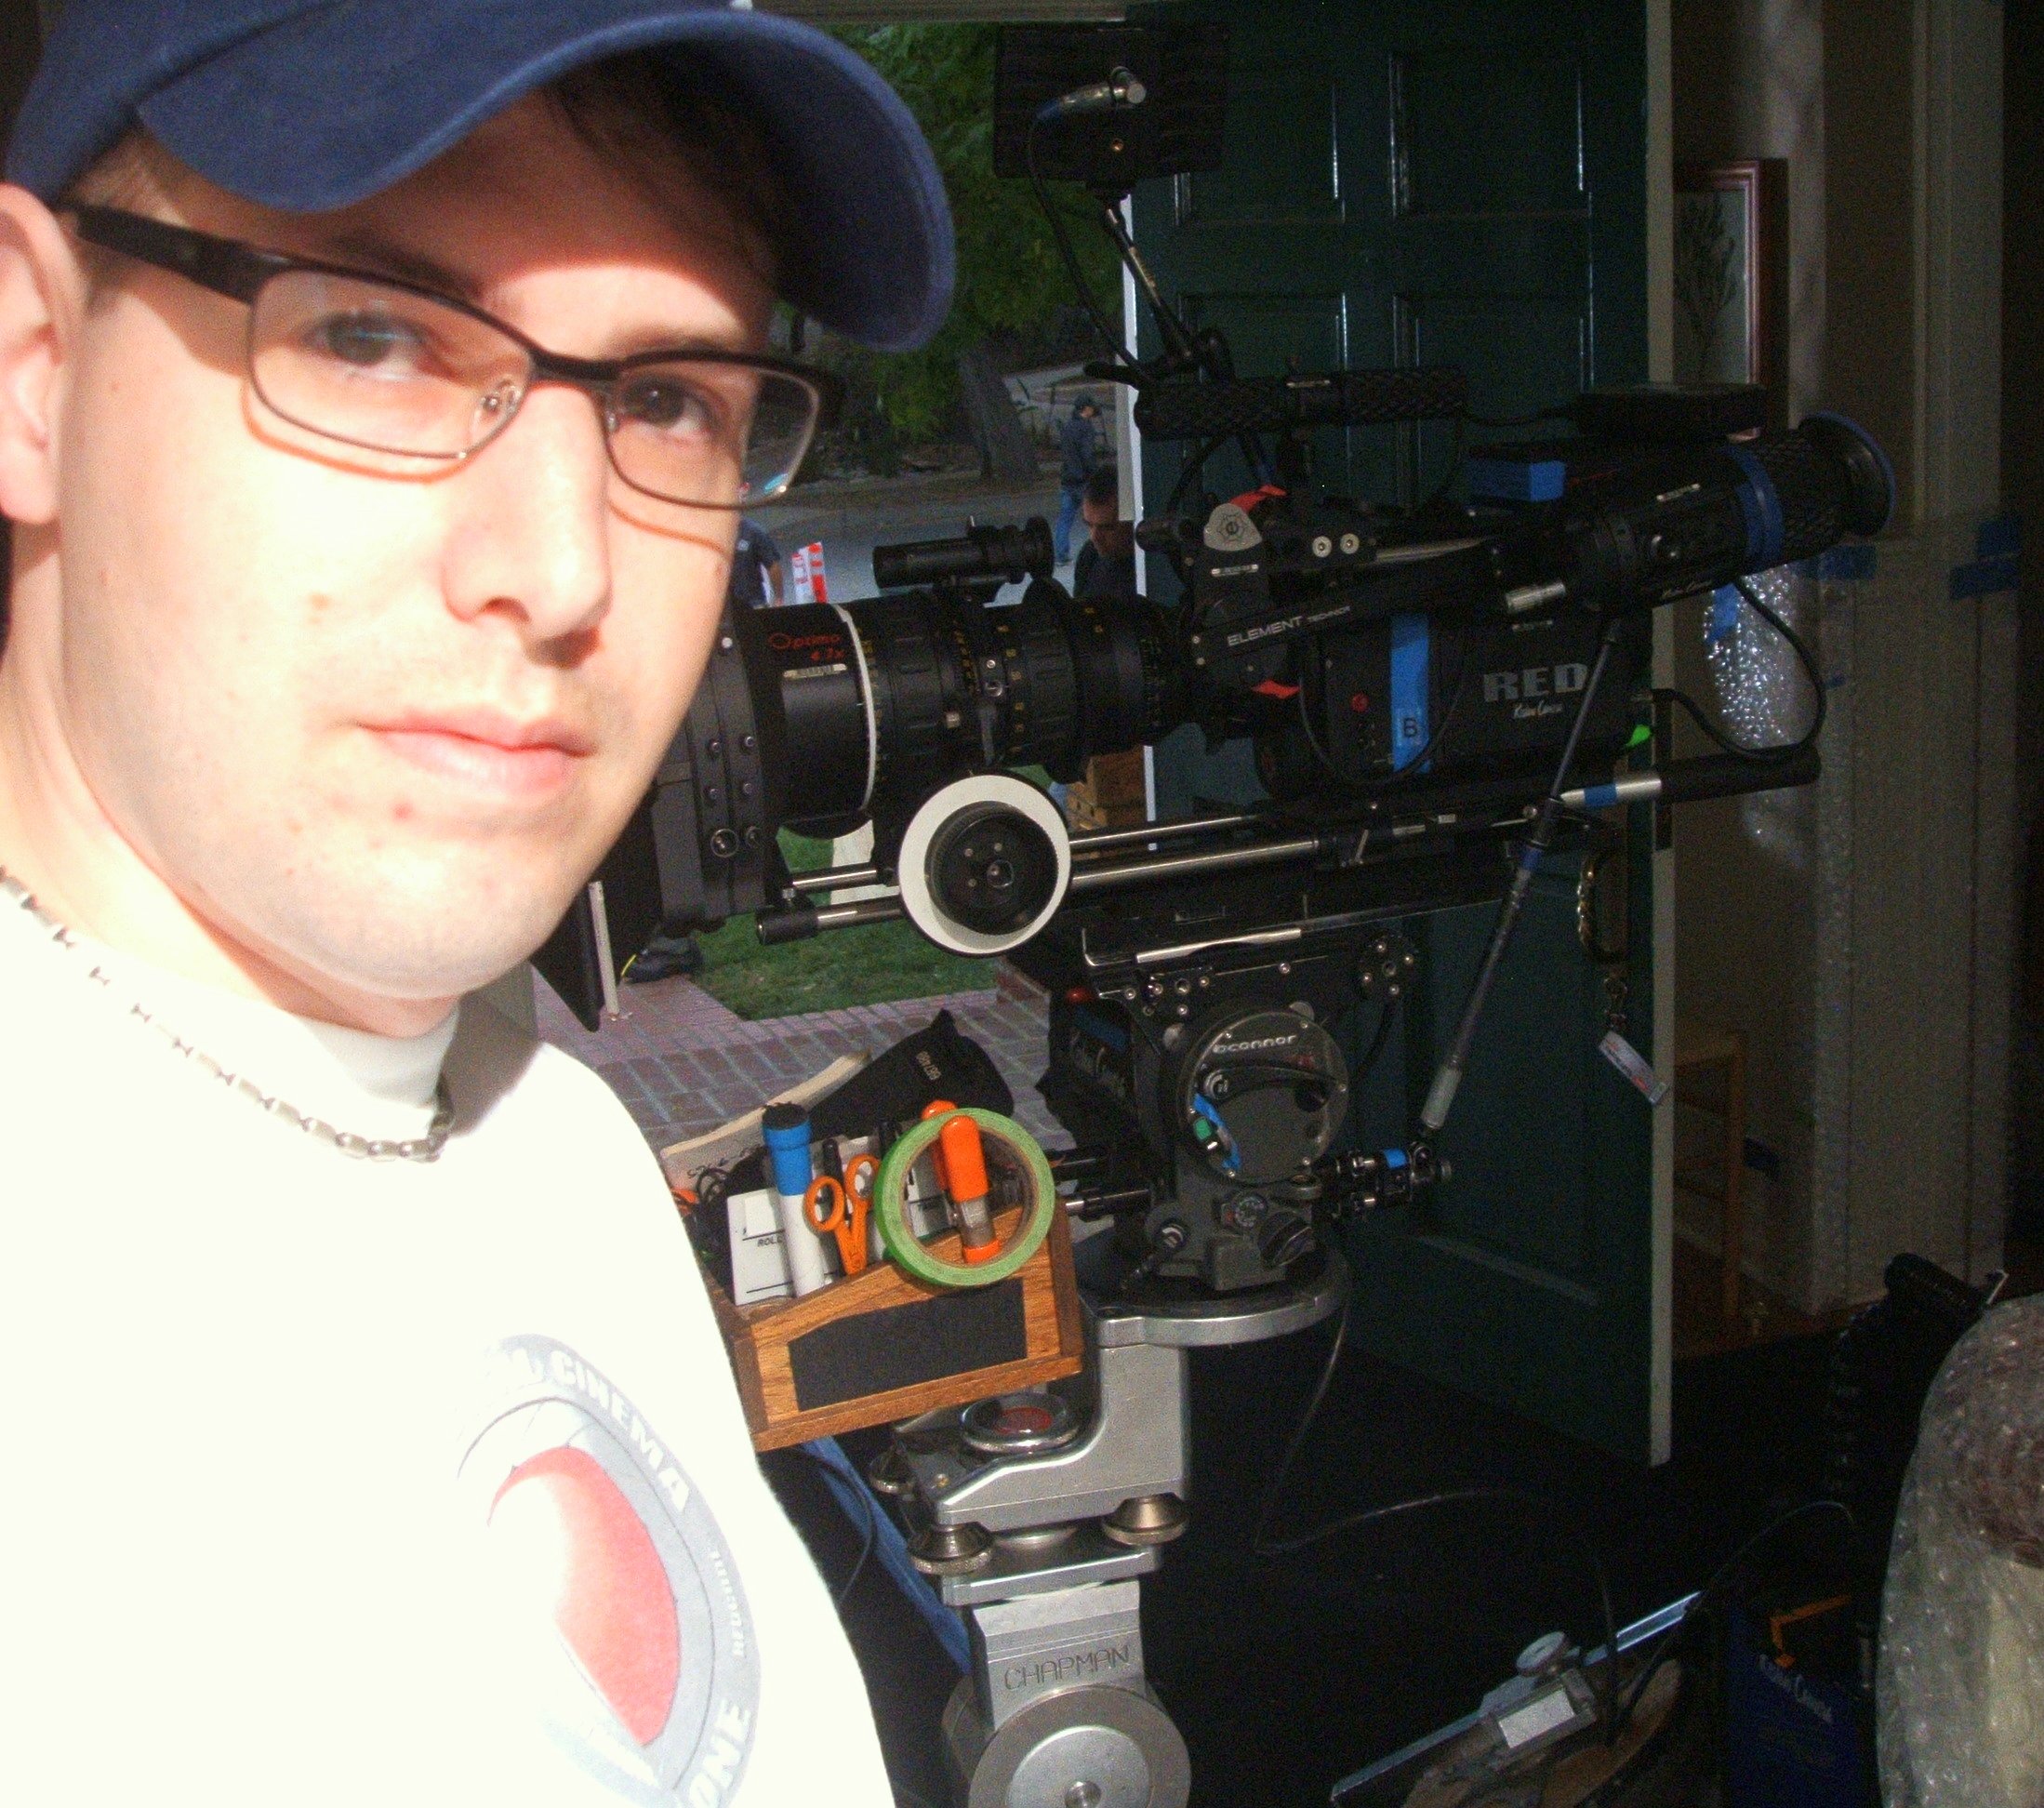 Casey Green on set with the RED ONE Digital Cinema Camera.